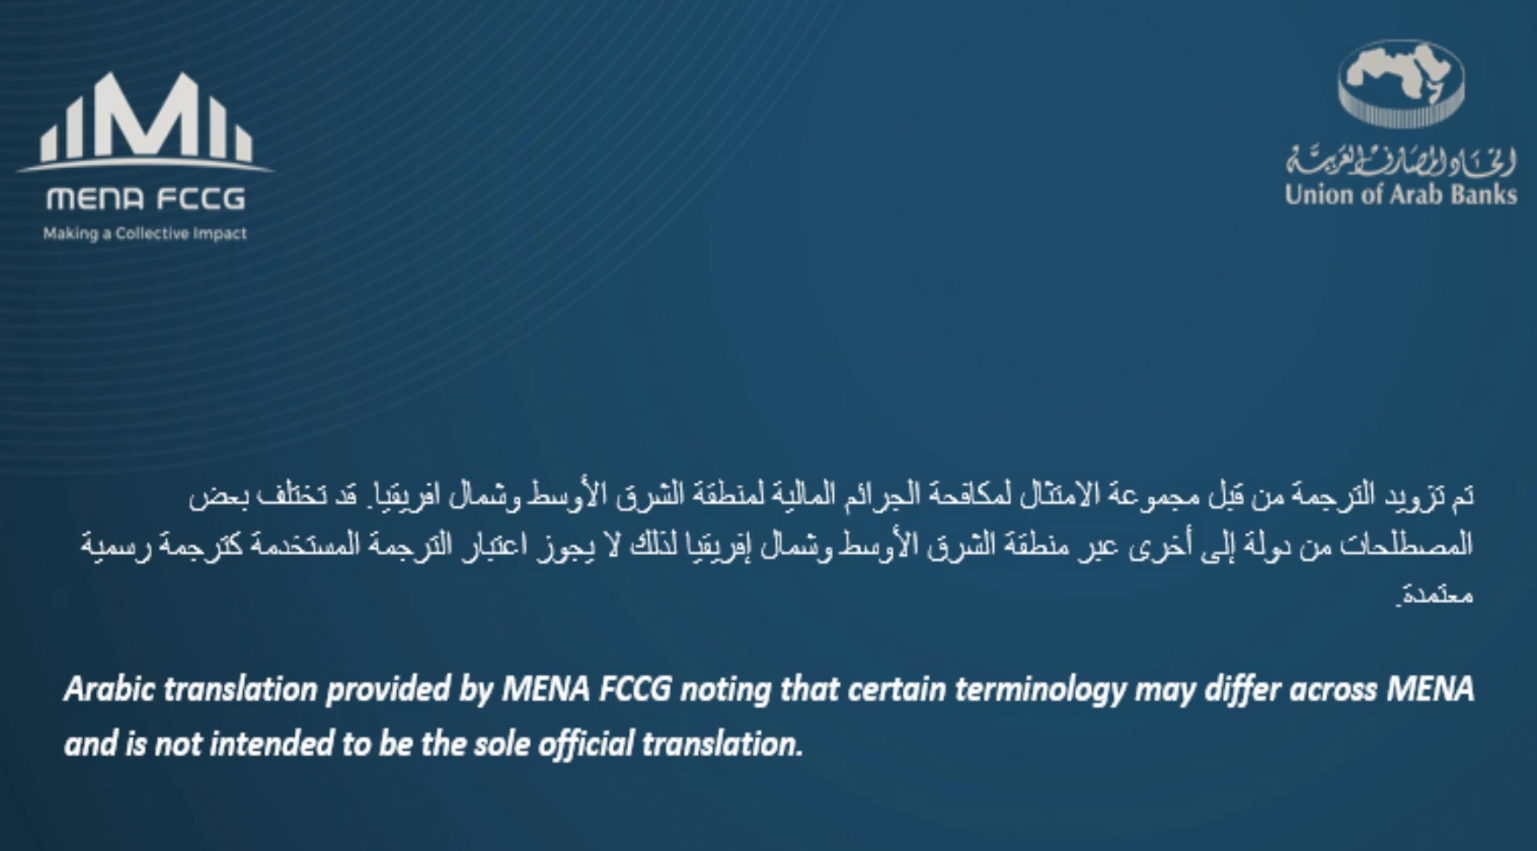 http://mena-fccg.magpiex.co.uk/wp-content/uploads/2020/09/5-Policies-and-procedures.png